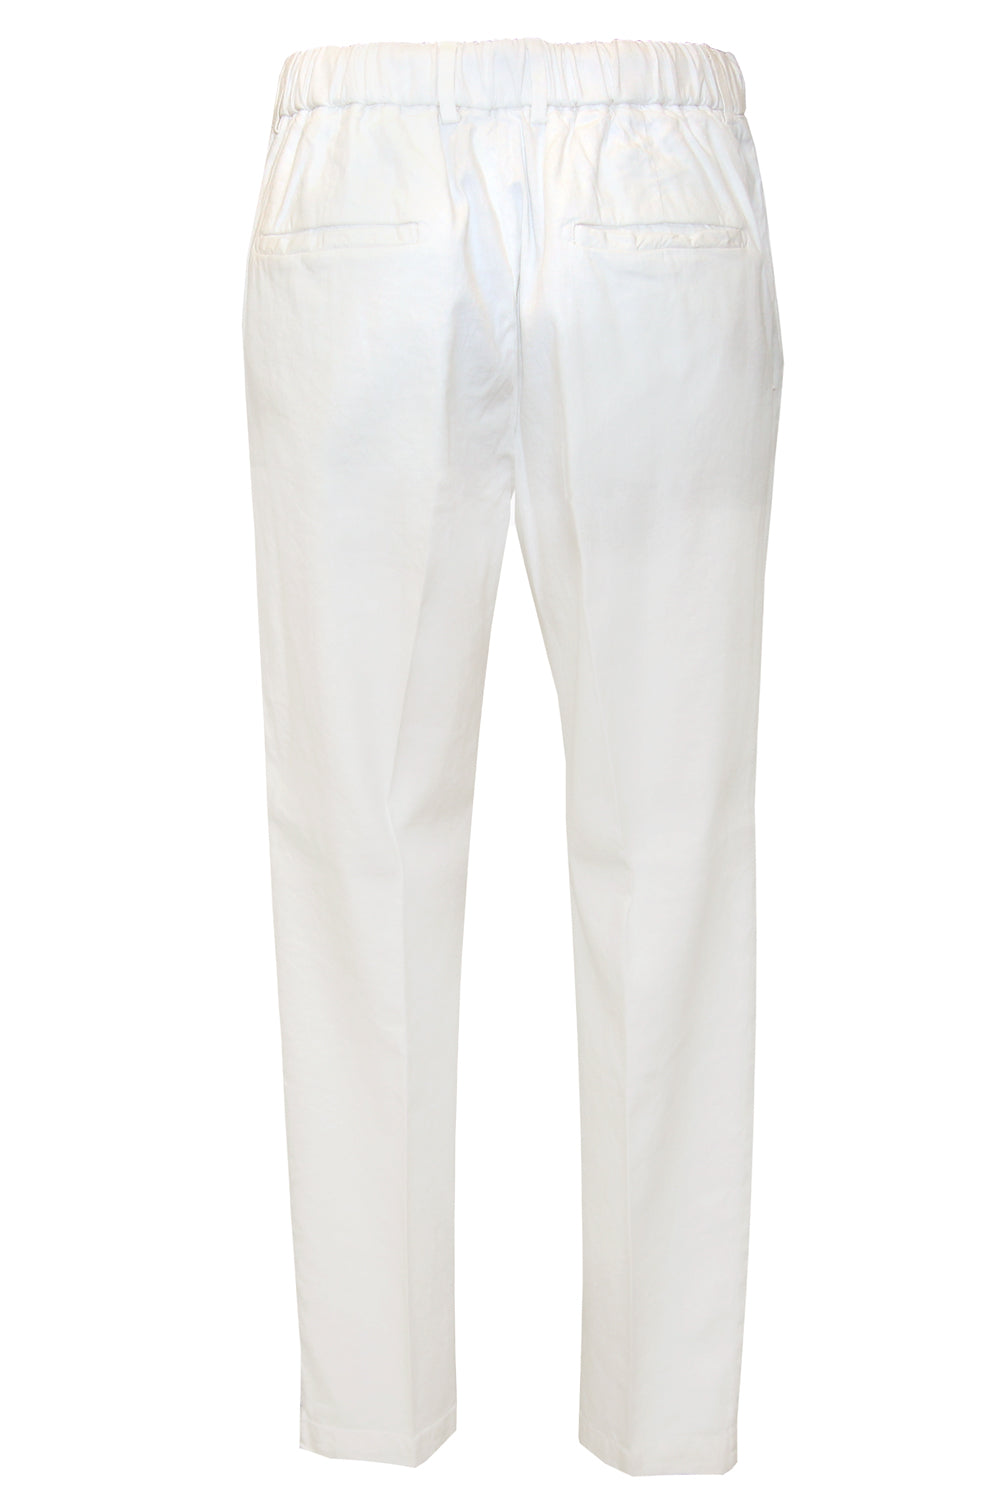 BE ABLE Pantalone Argo con coulisse